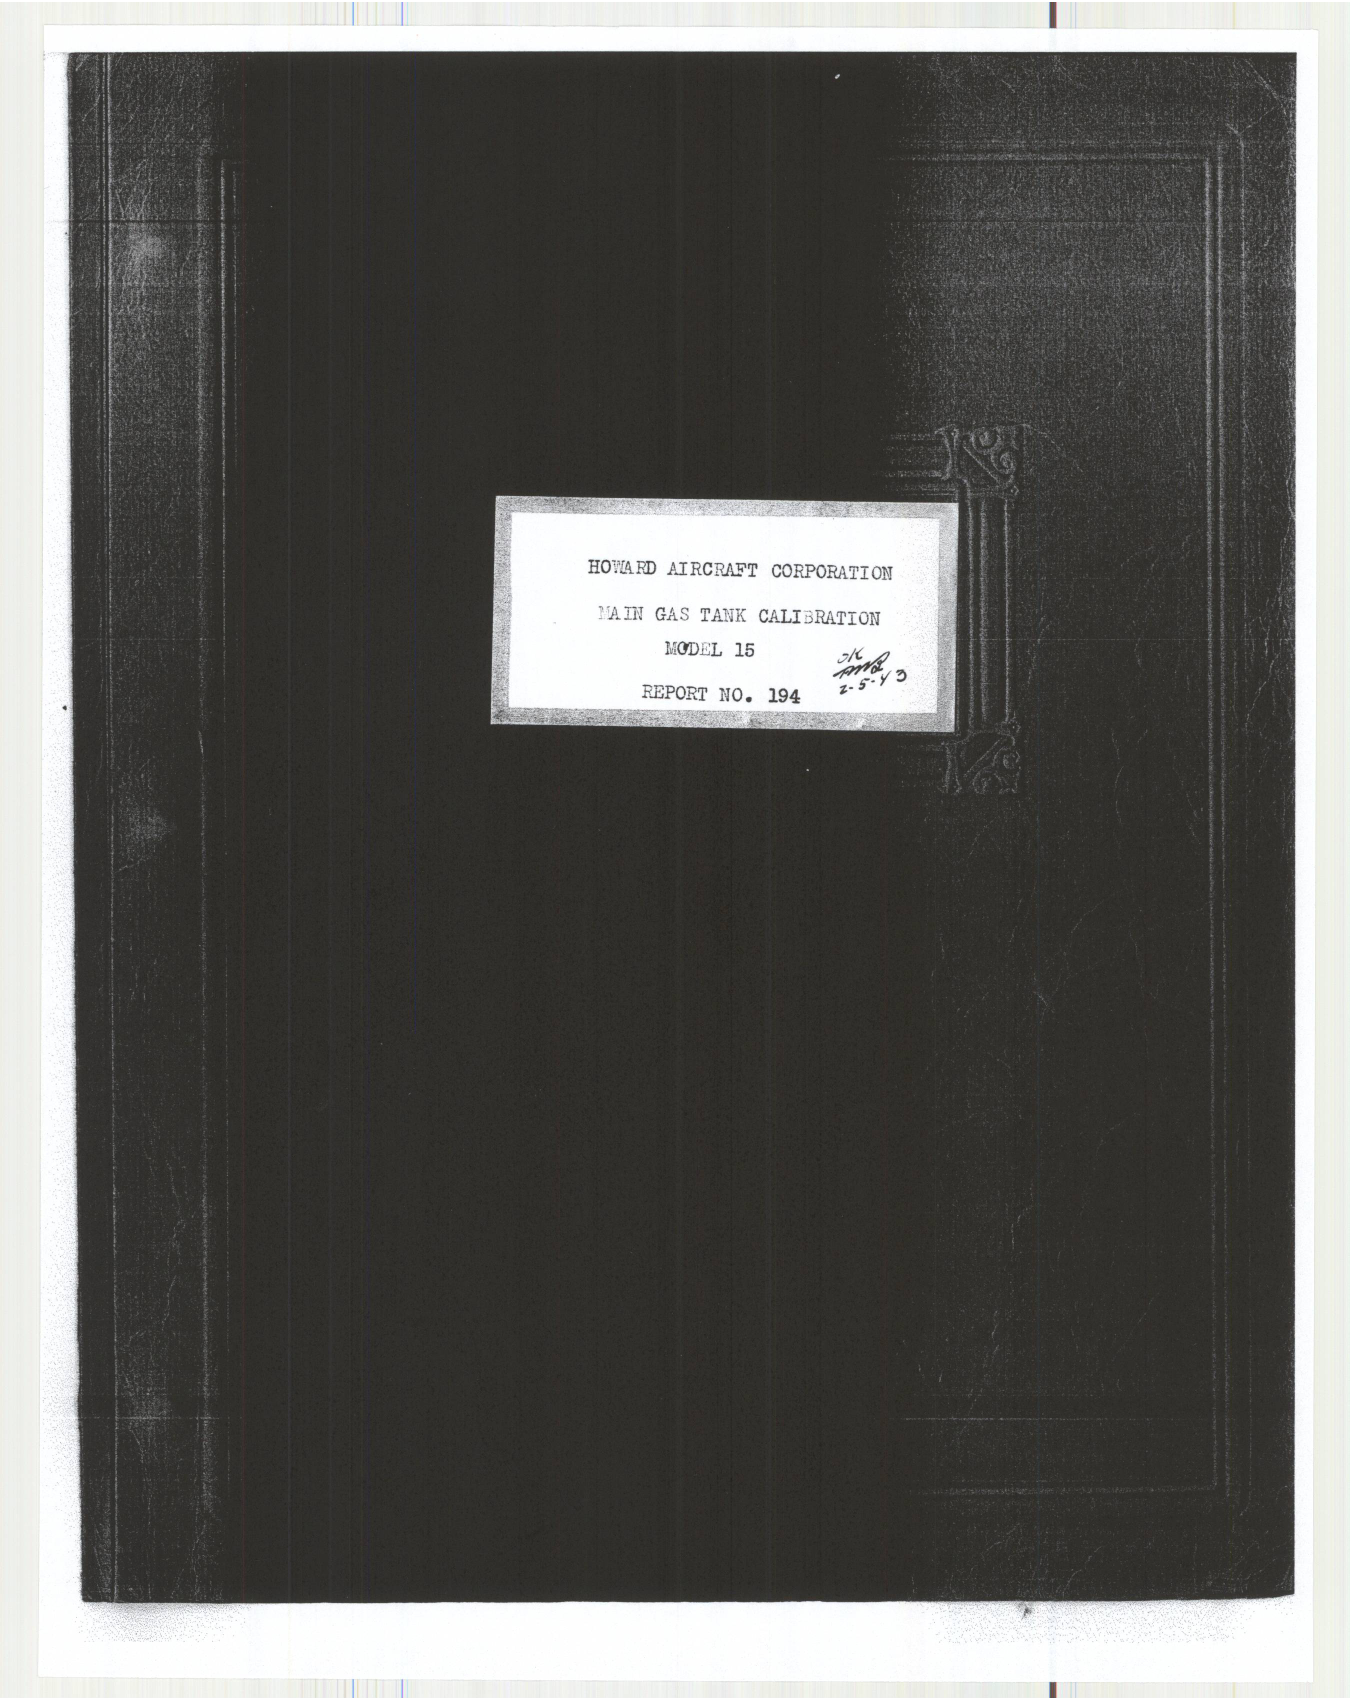 Sample page 4 from AirCorps Library document: Report 194, Main Gas Tank Calibration, DGA-15